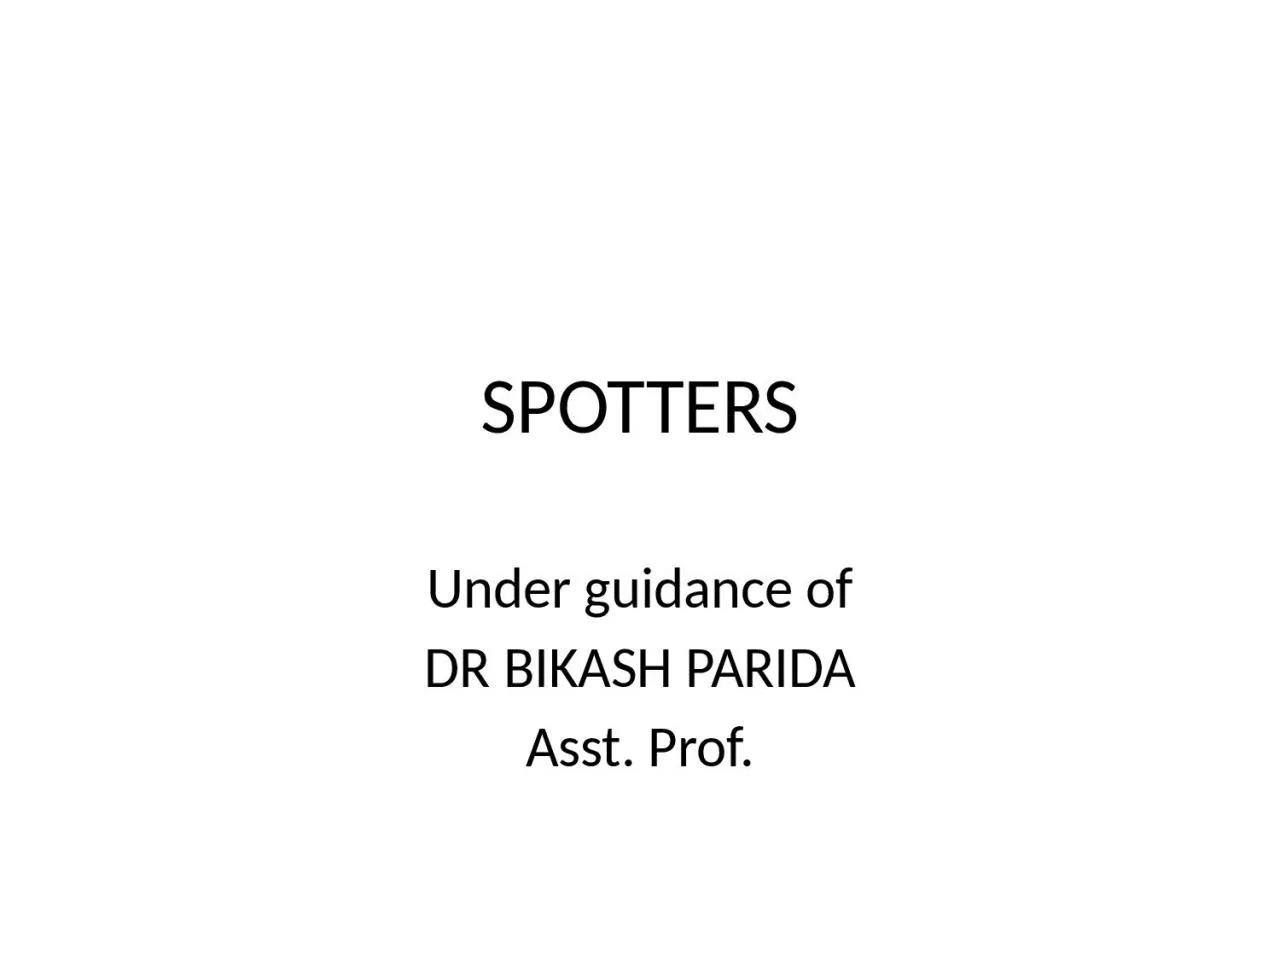 SPOTTERS Under guidance of